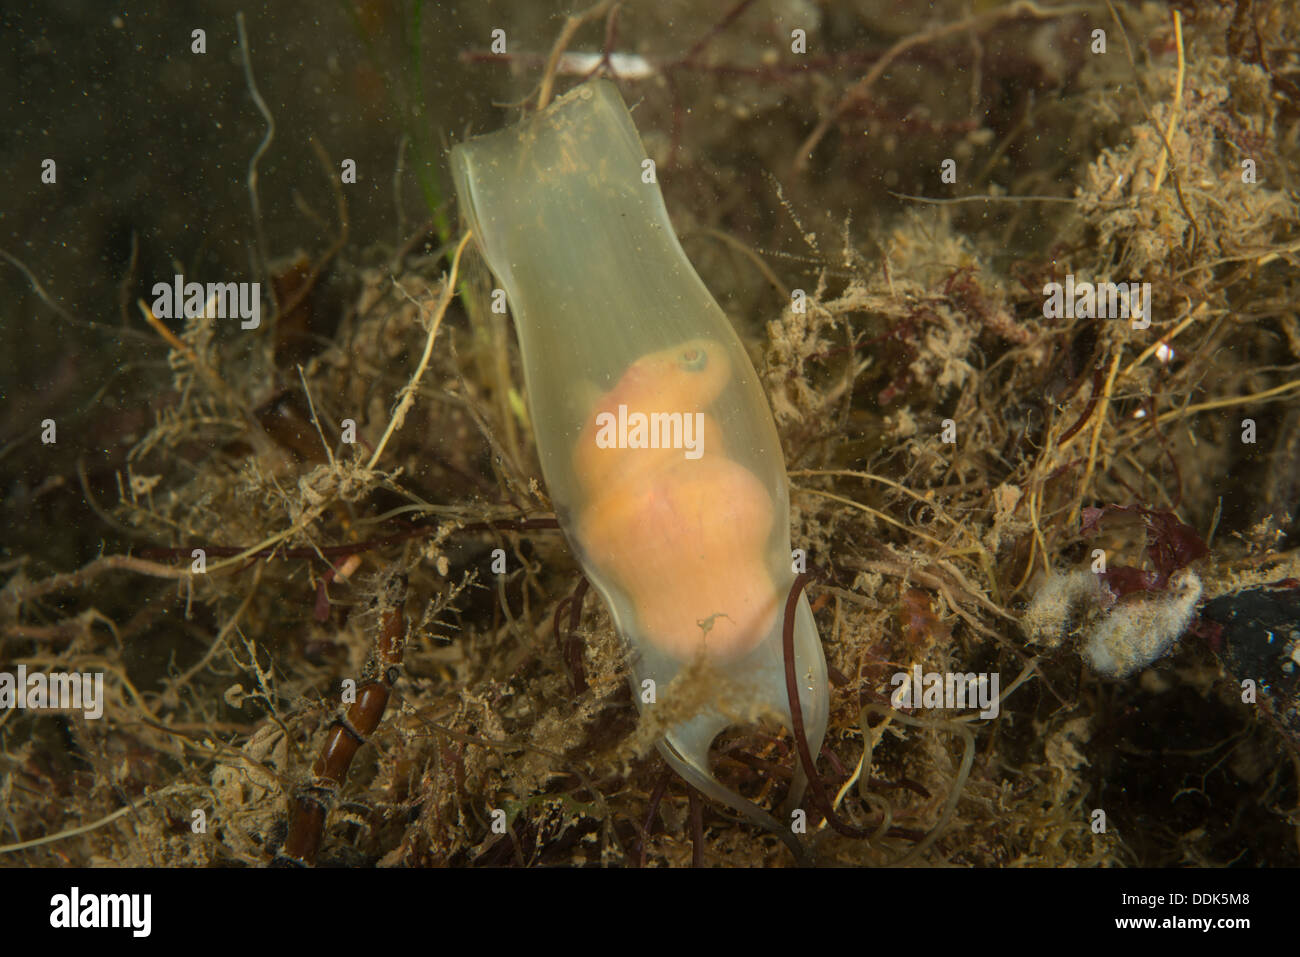 Egg case (Mermaids purse) of  a Lesser Spotted Dogfish. Stock Photo